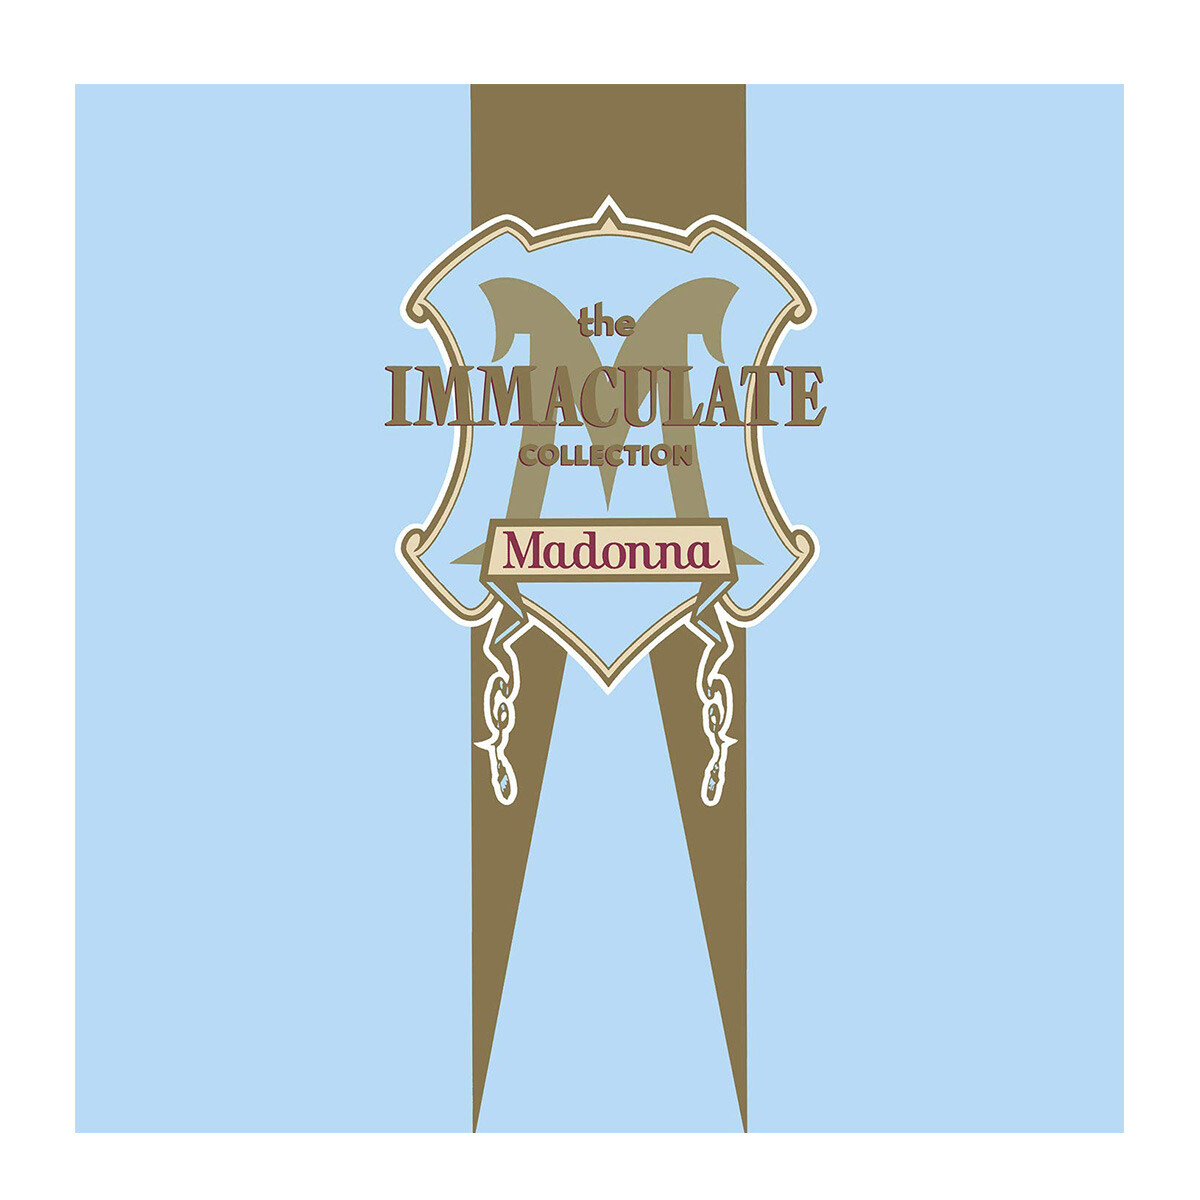 (c) Madonna-the Inmaculate Collection (arg) 